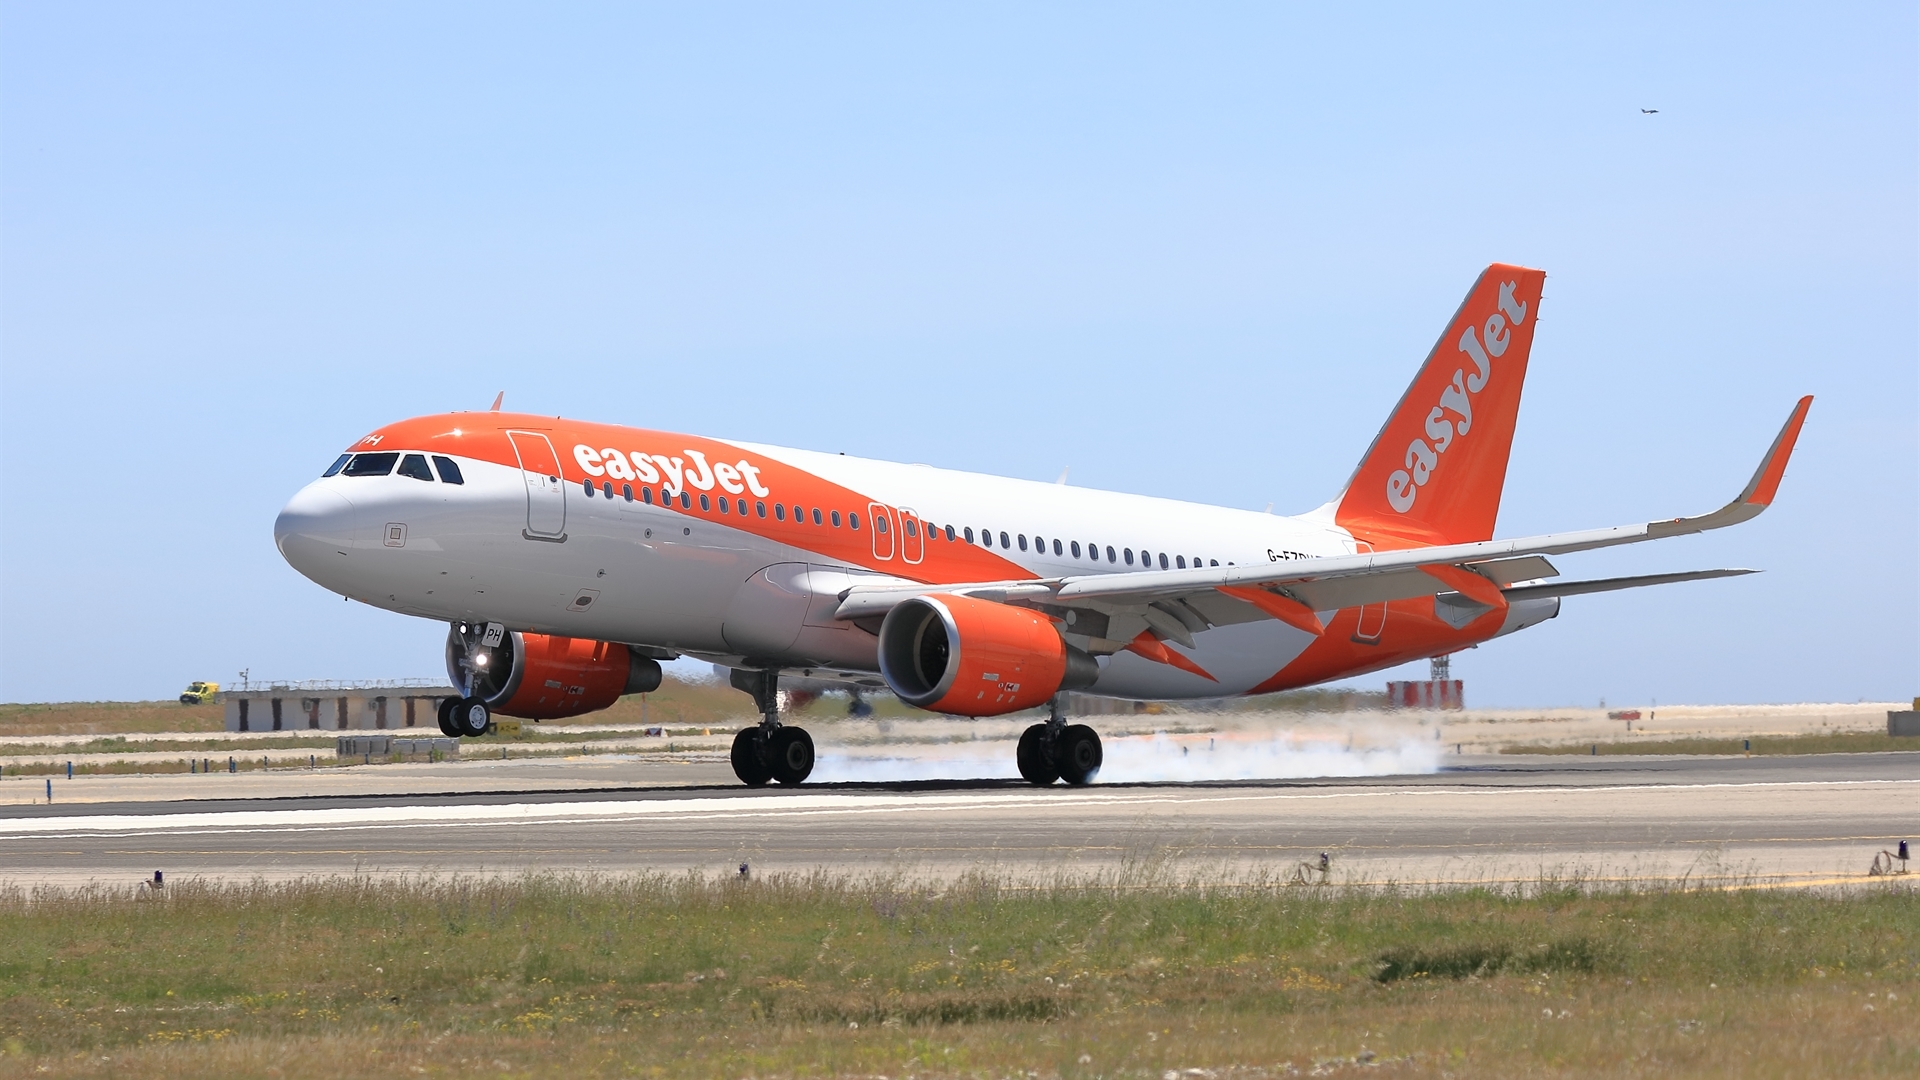 easyJet welcomes Airbus' zero-emission aircraft concepts